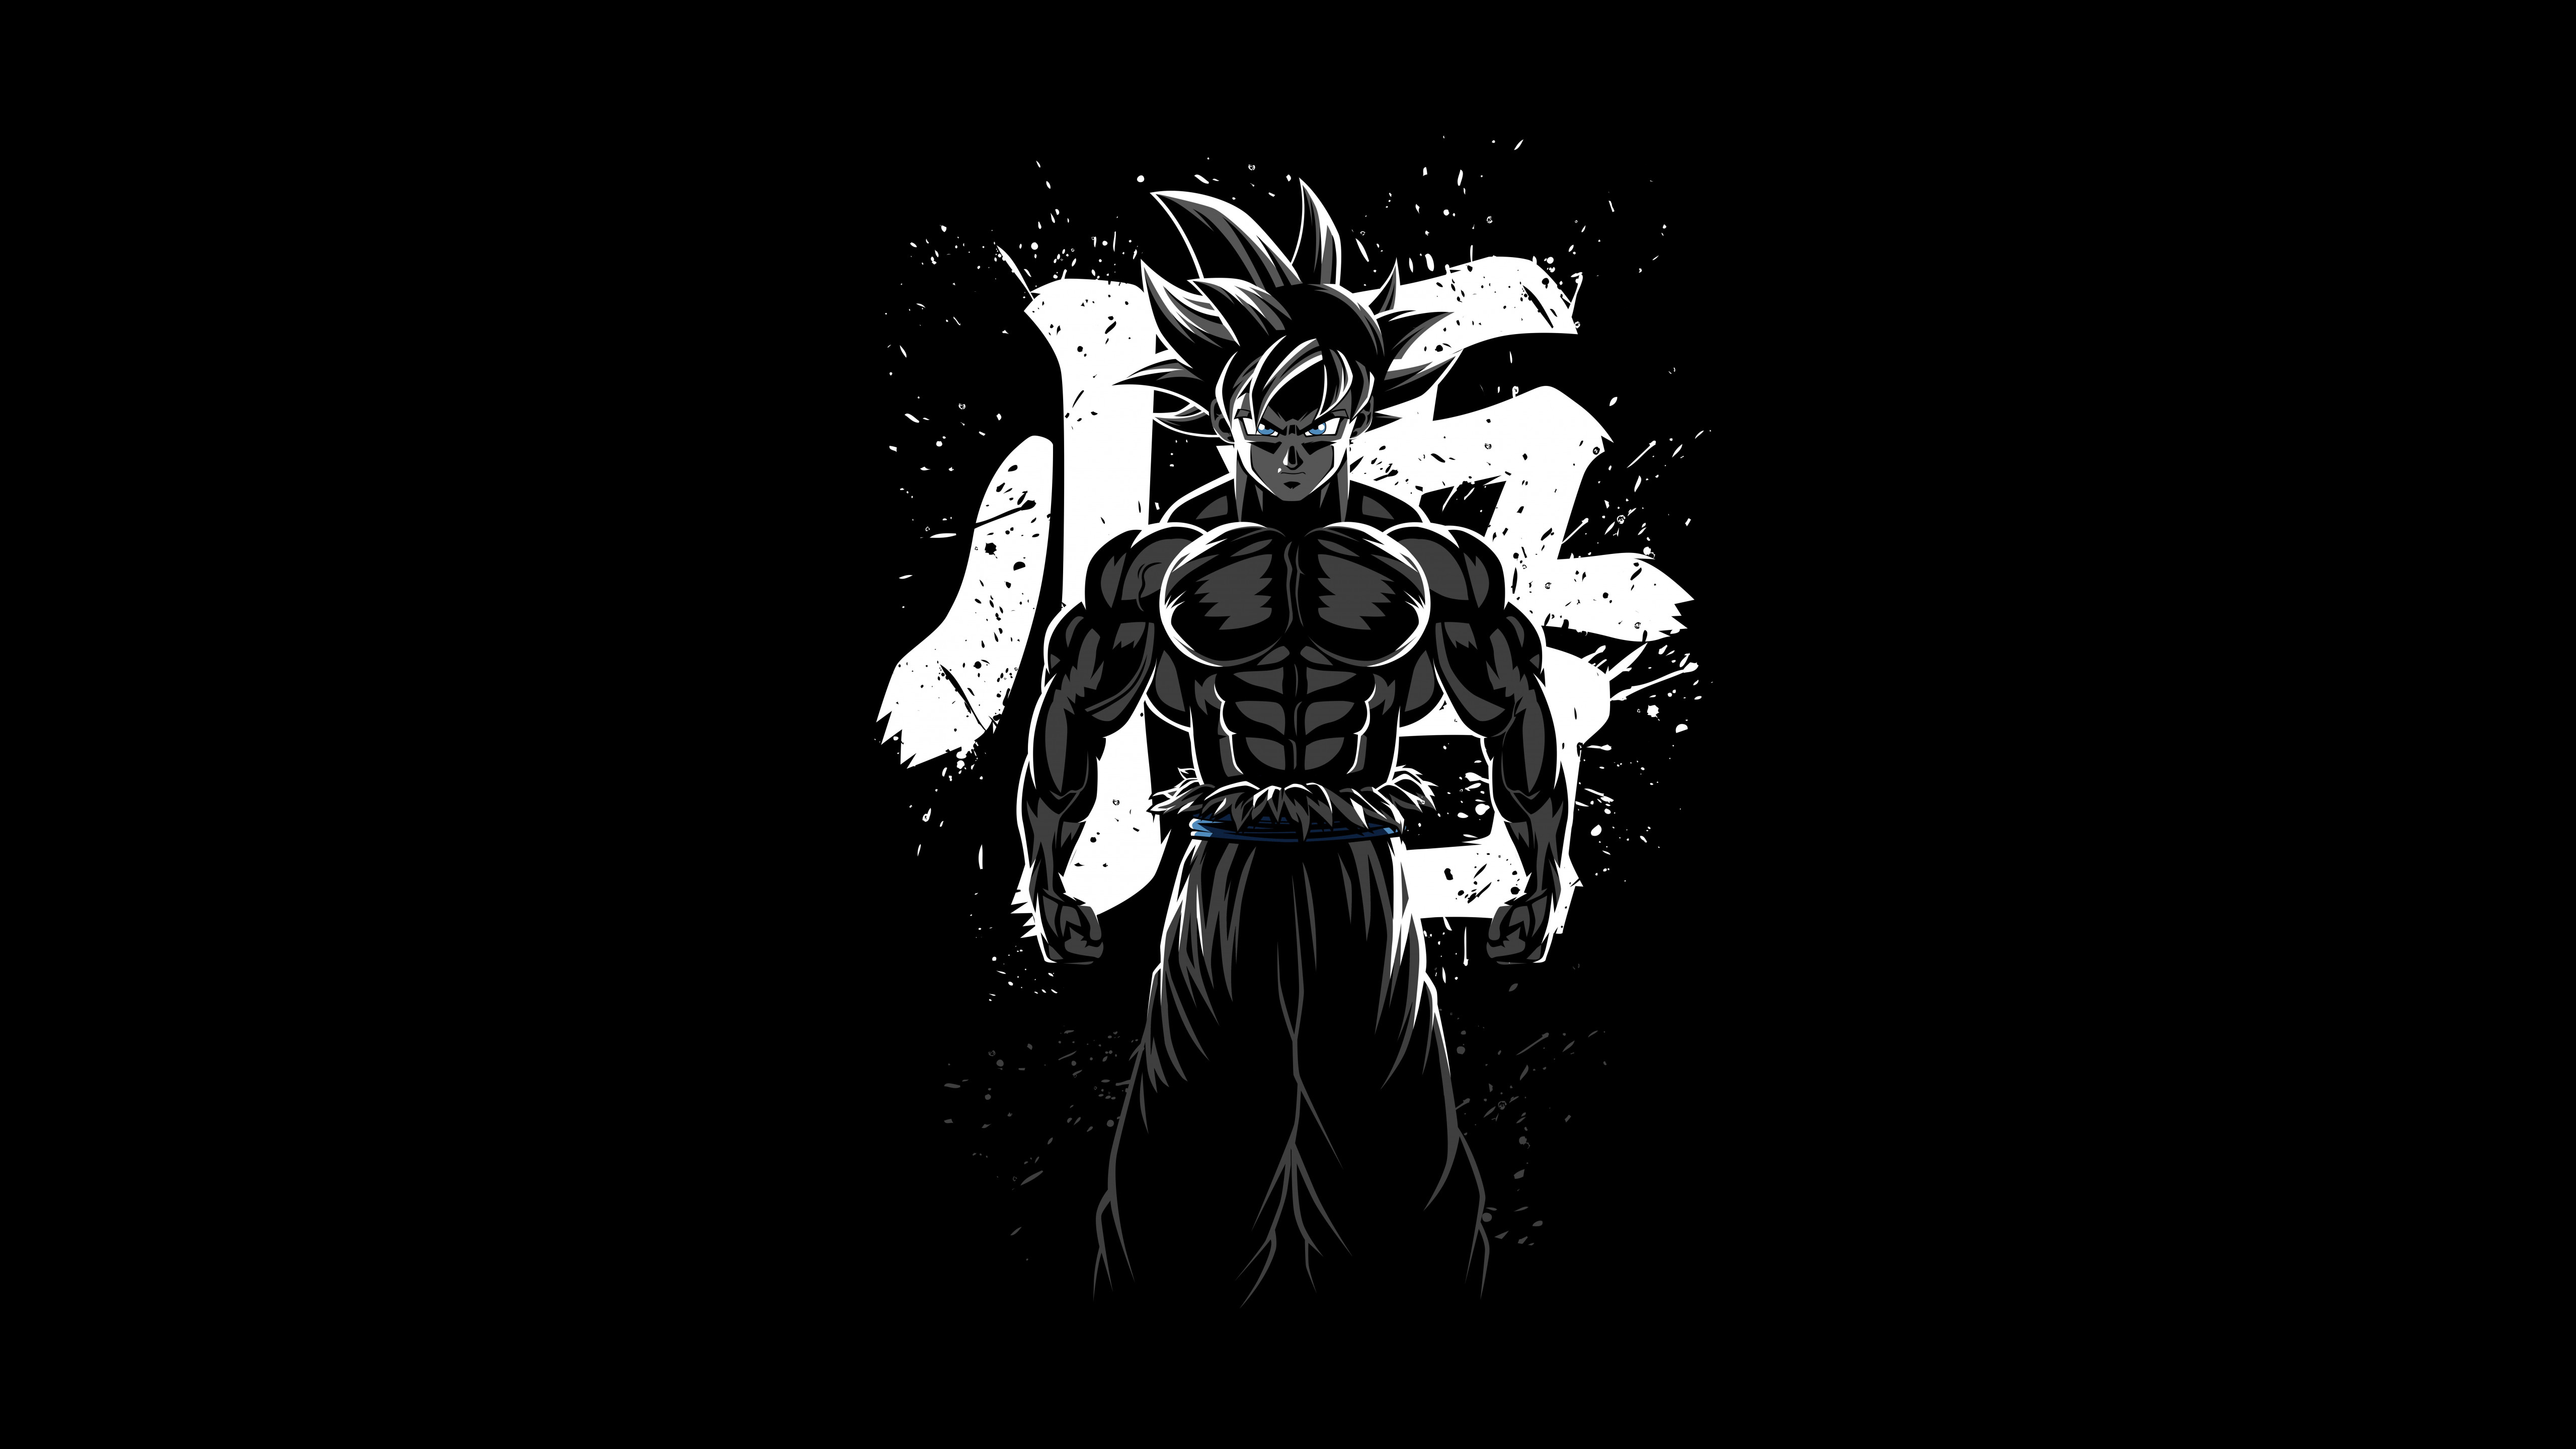 Powerful and iconic Background 4k goku for anime and Dragon Ball Z fans